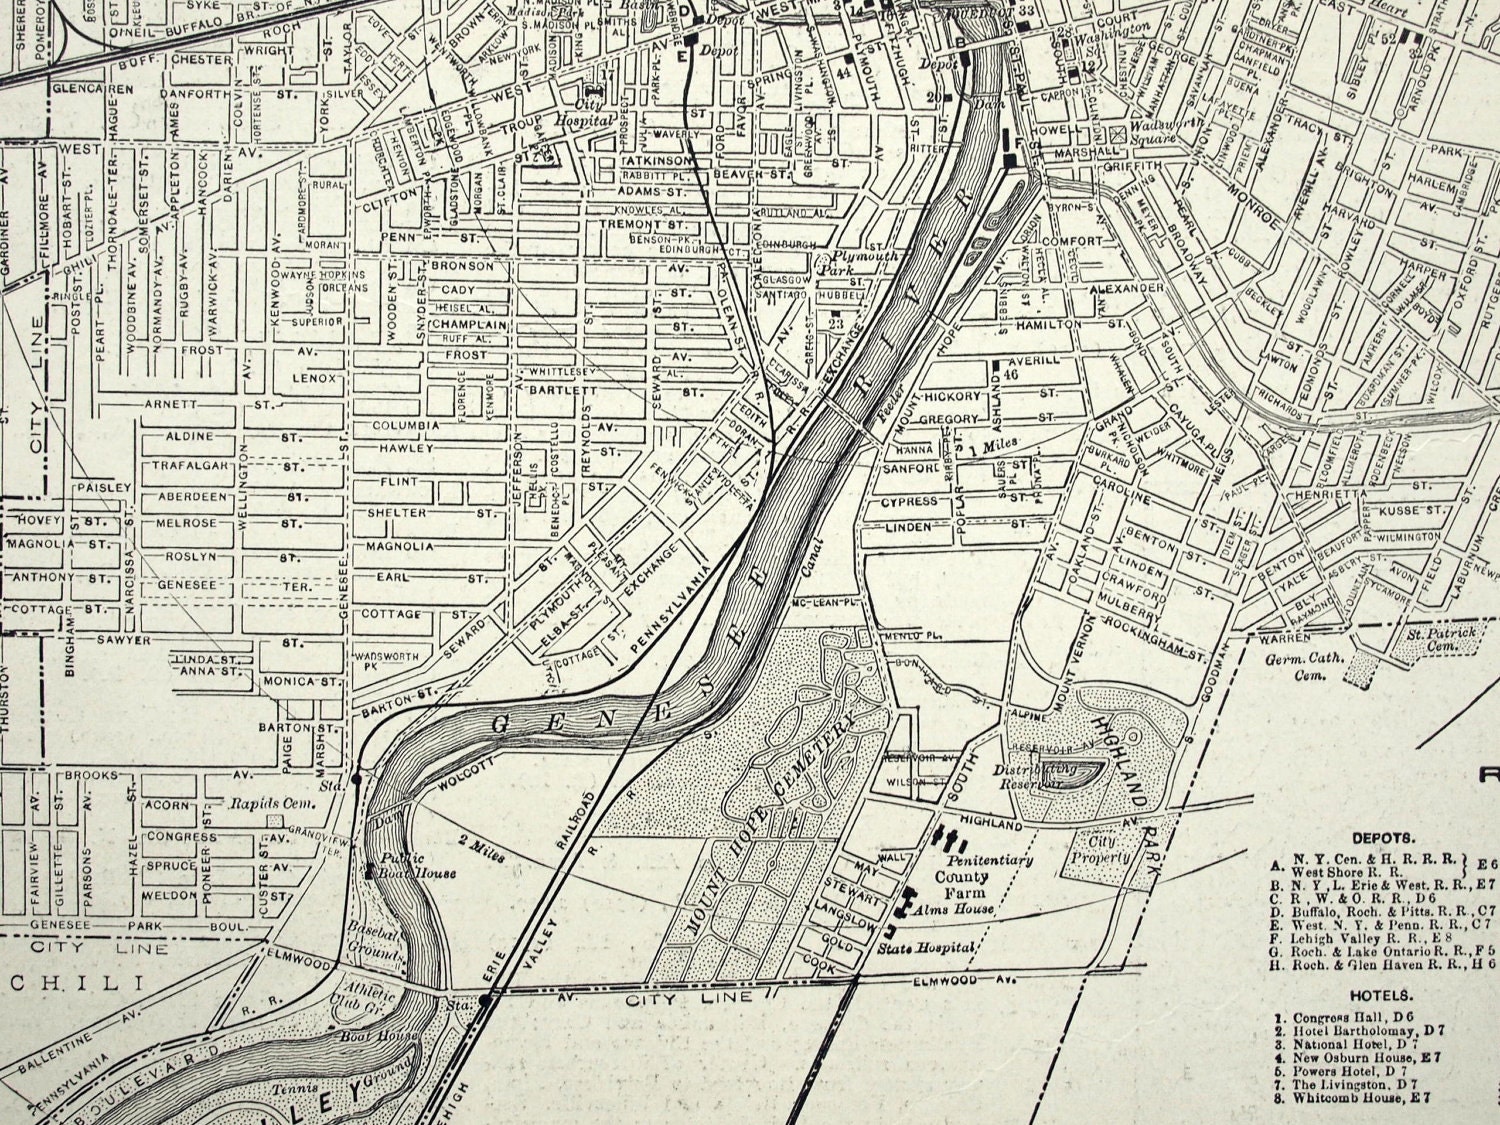 1919 Vintage Street Map of Rochester New York
